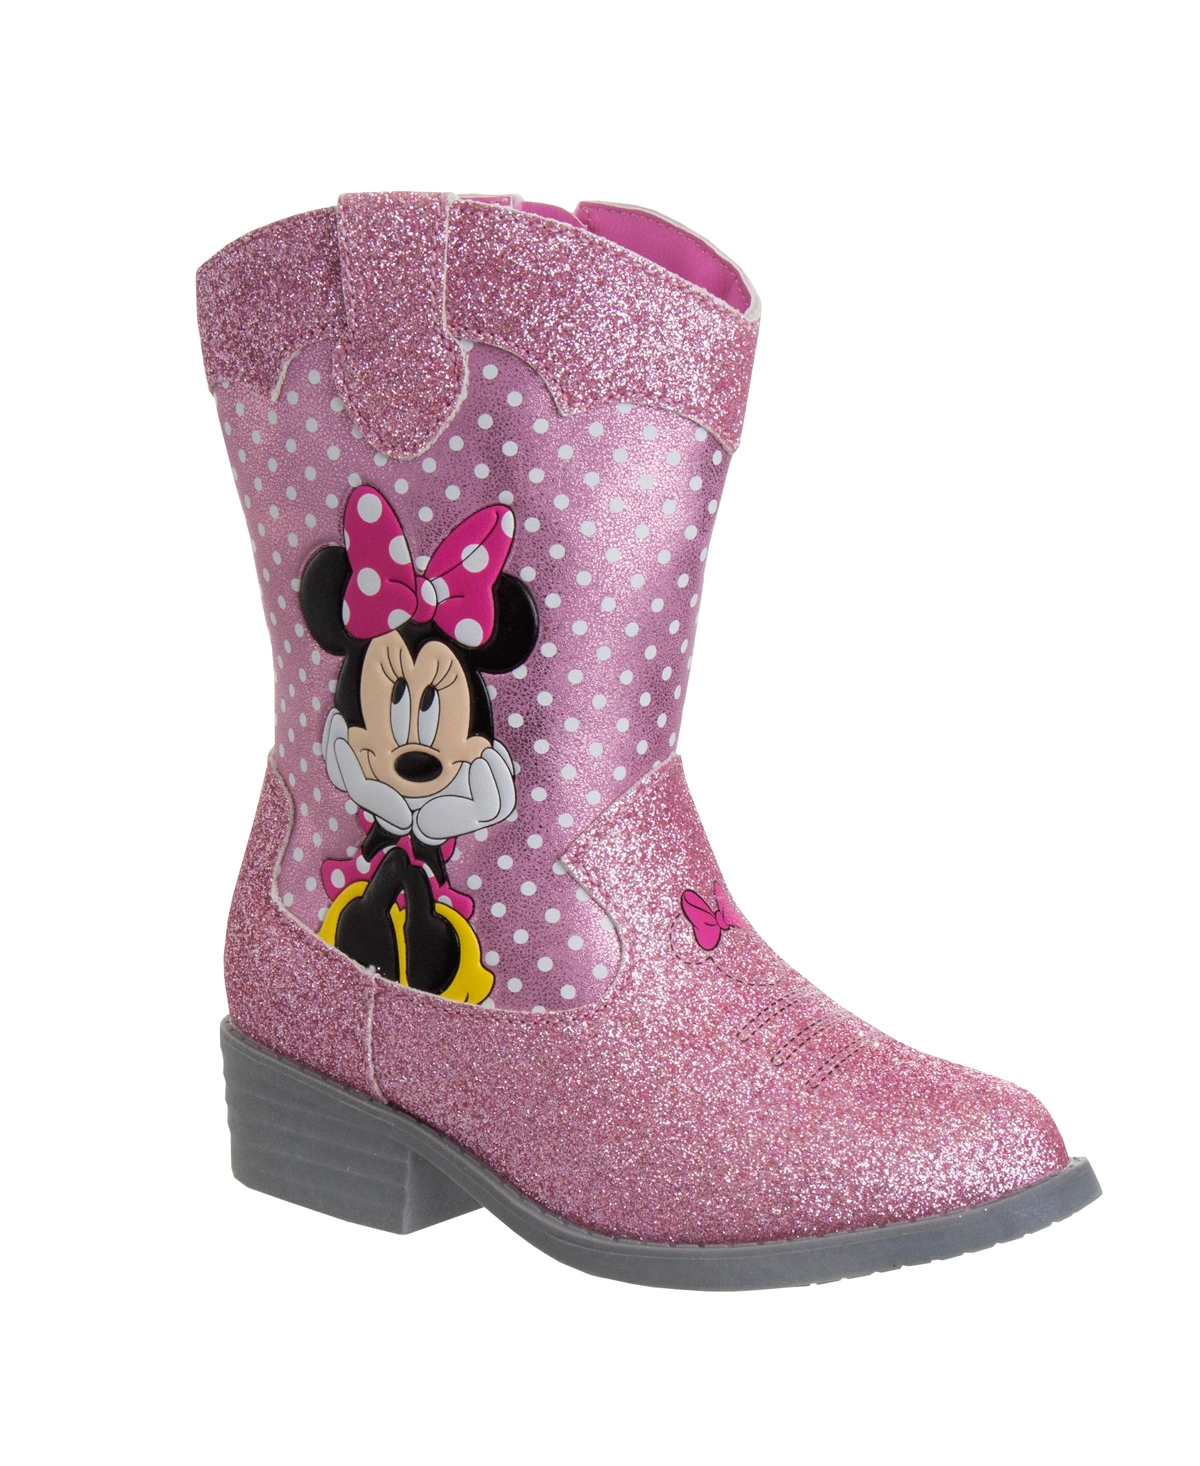 Disney Babies' Toddler Girls Minnie Mouse Cowboy Boots In Pink